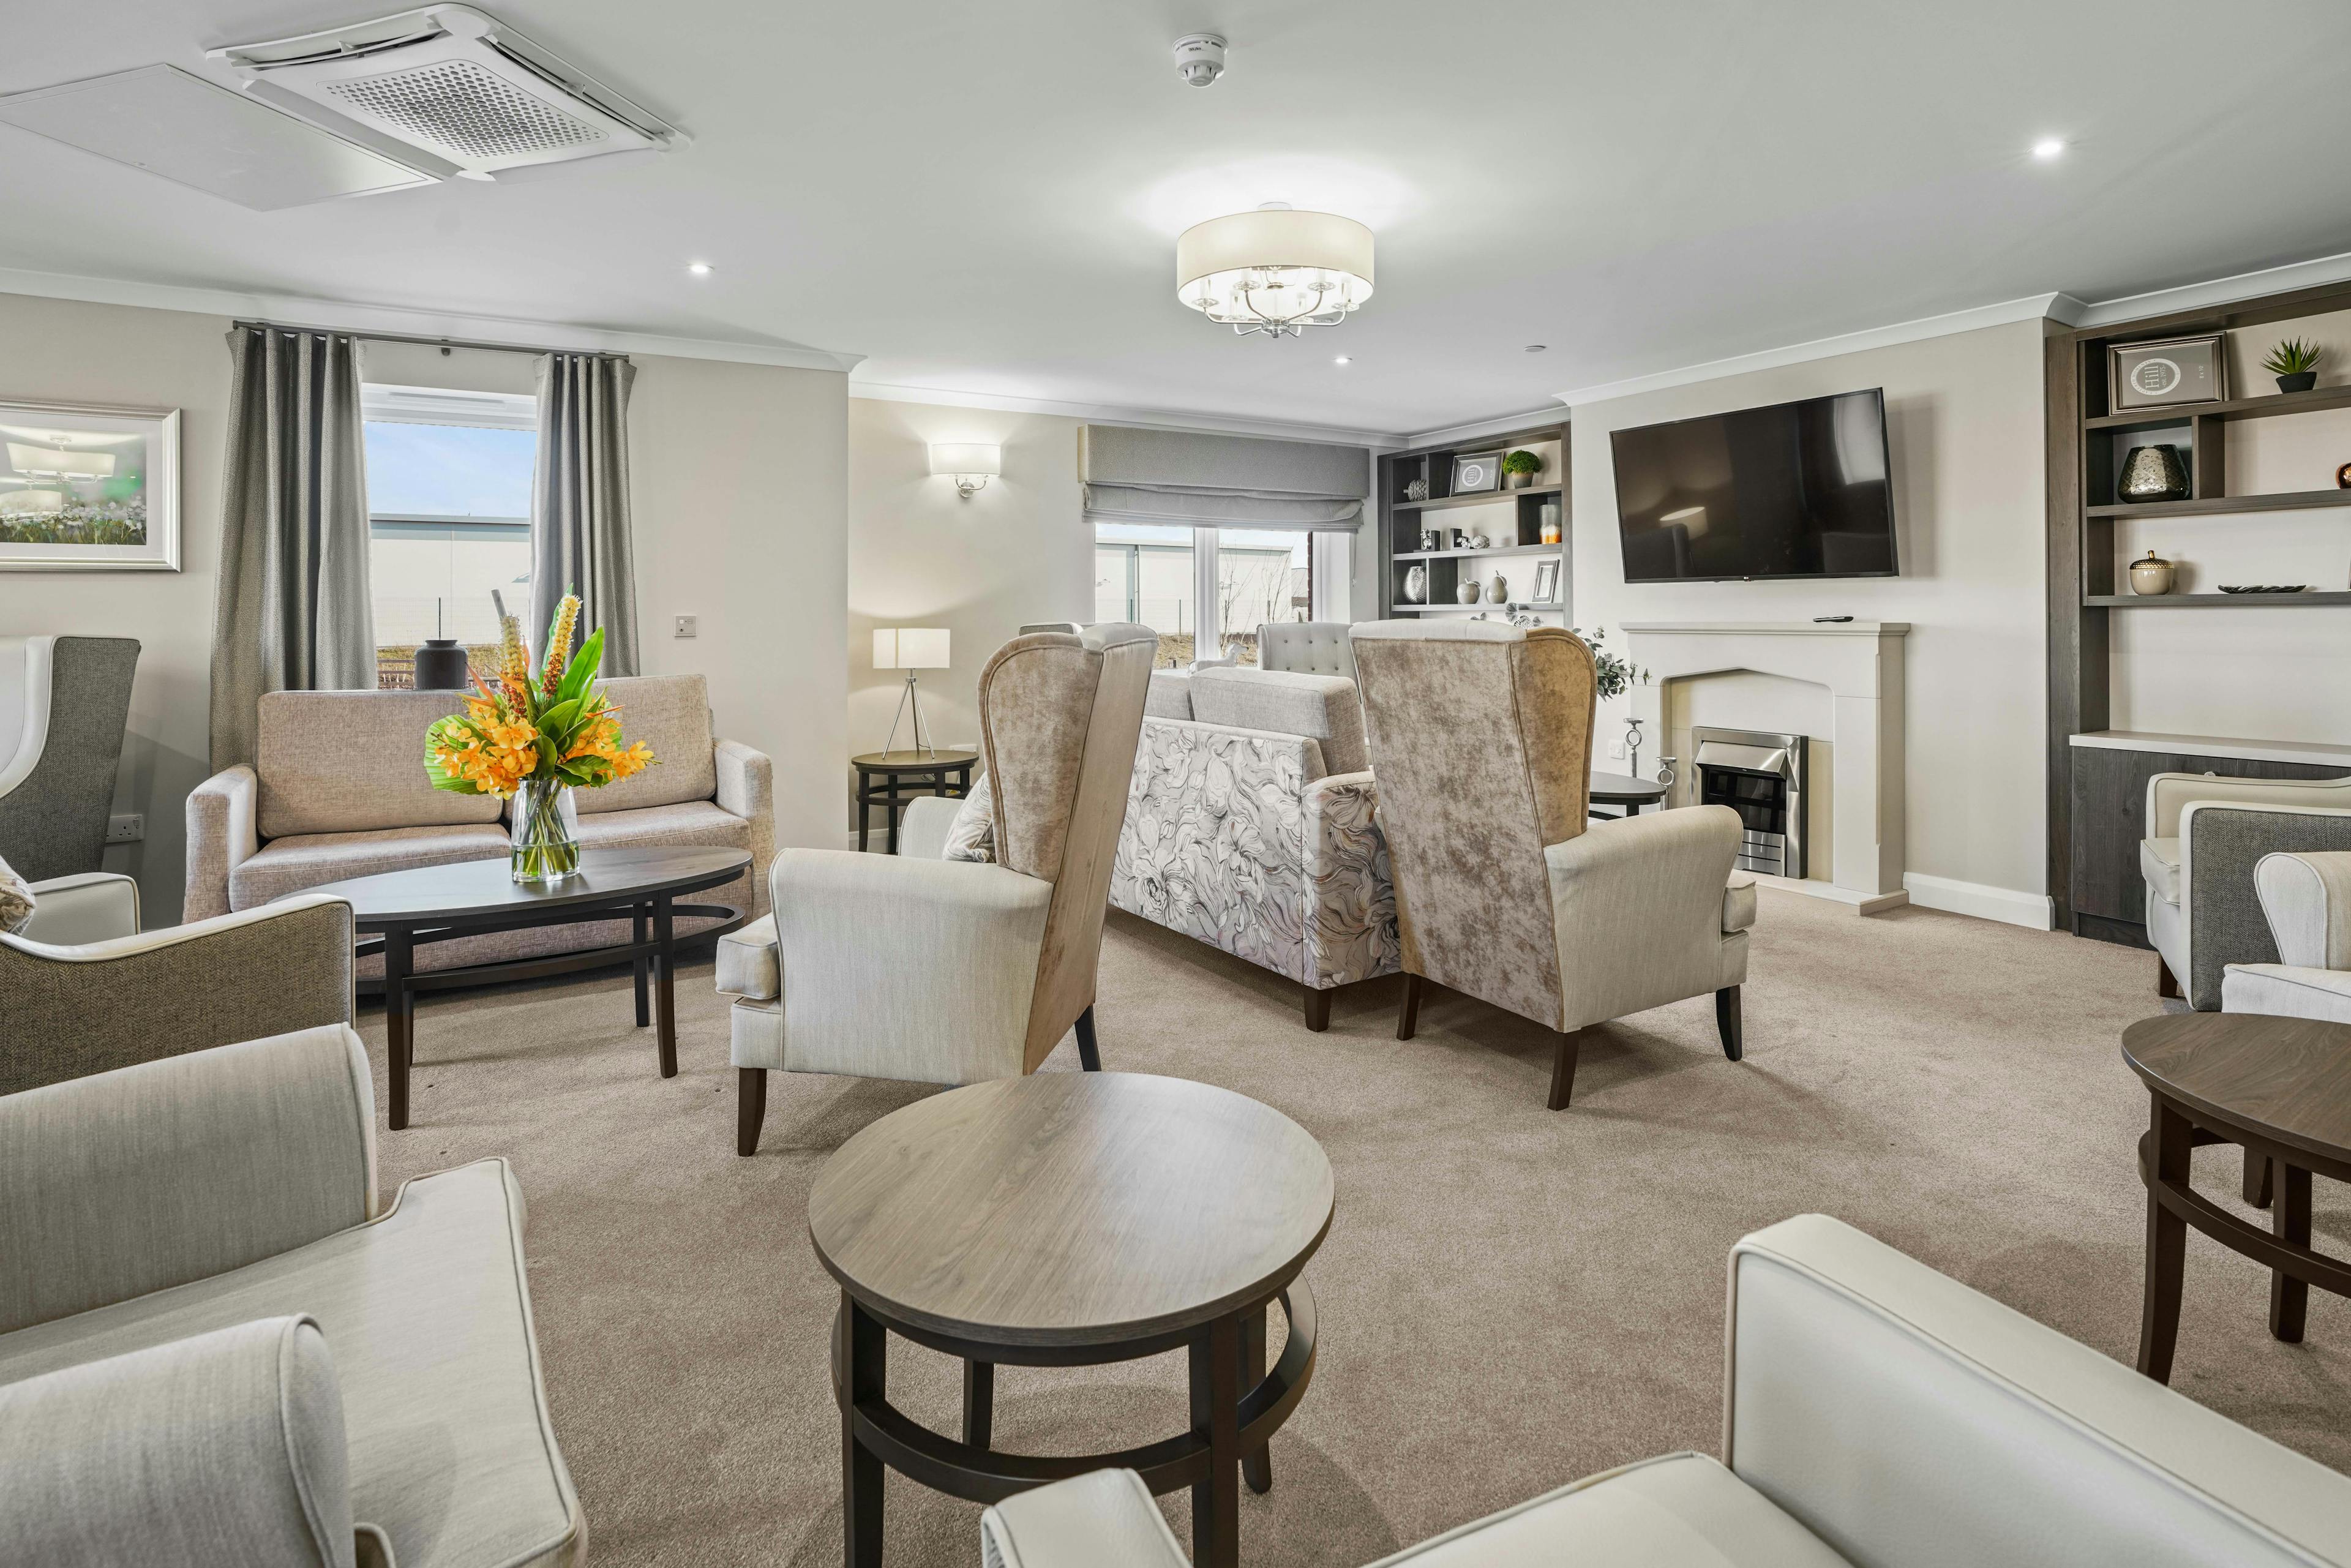 Lounge of Cloverleaf care home in Lincoln, Lincolnshire